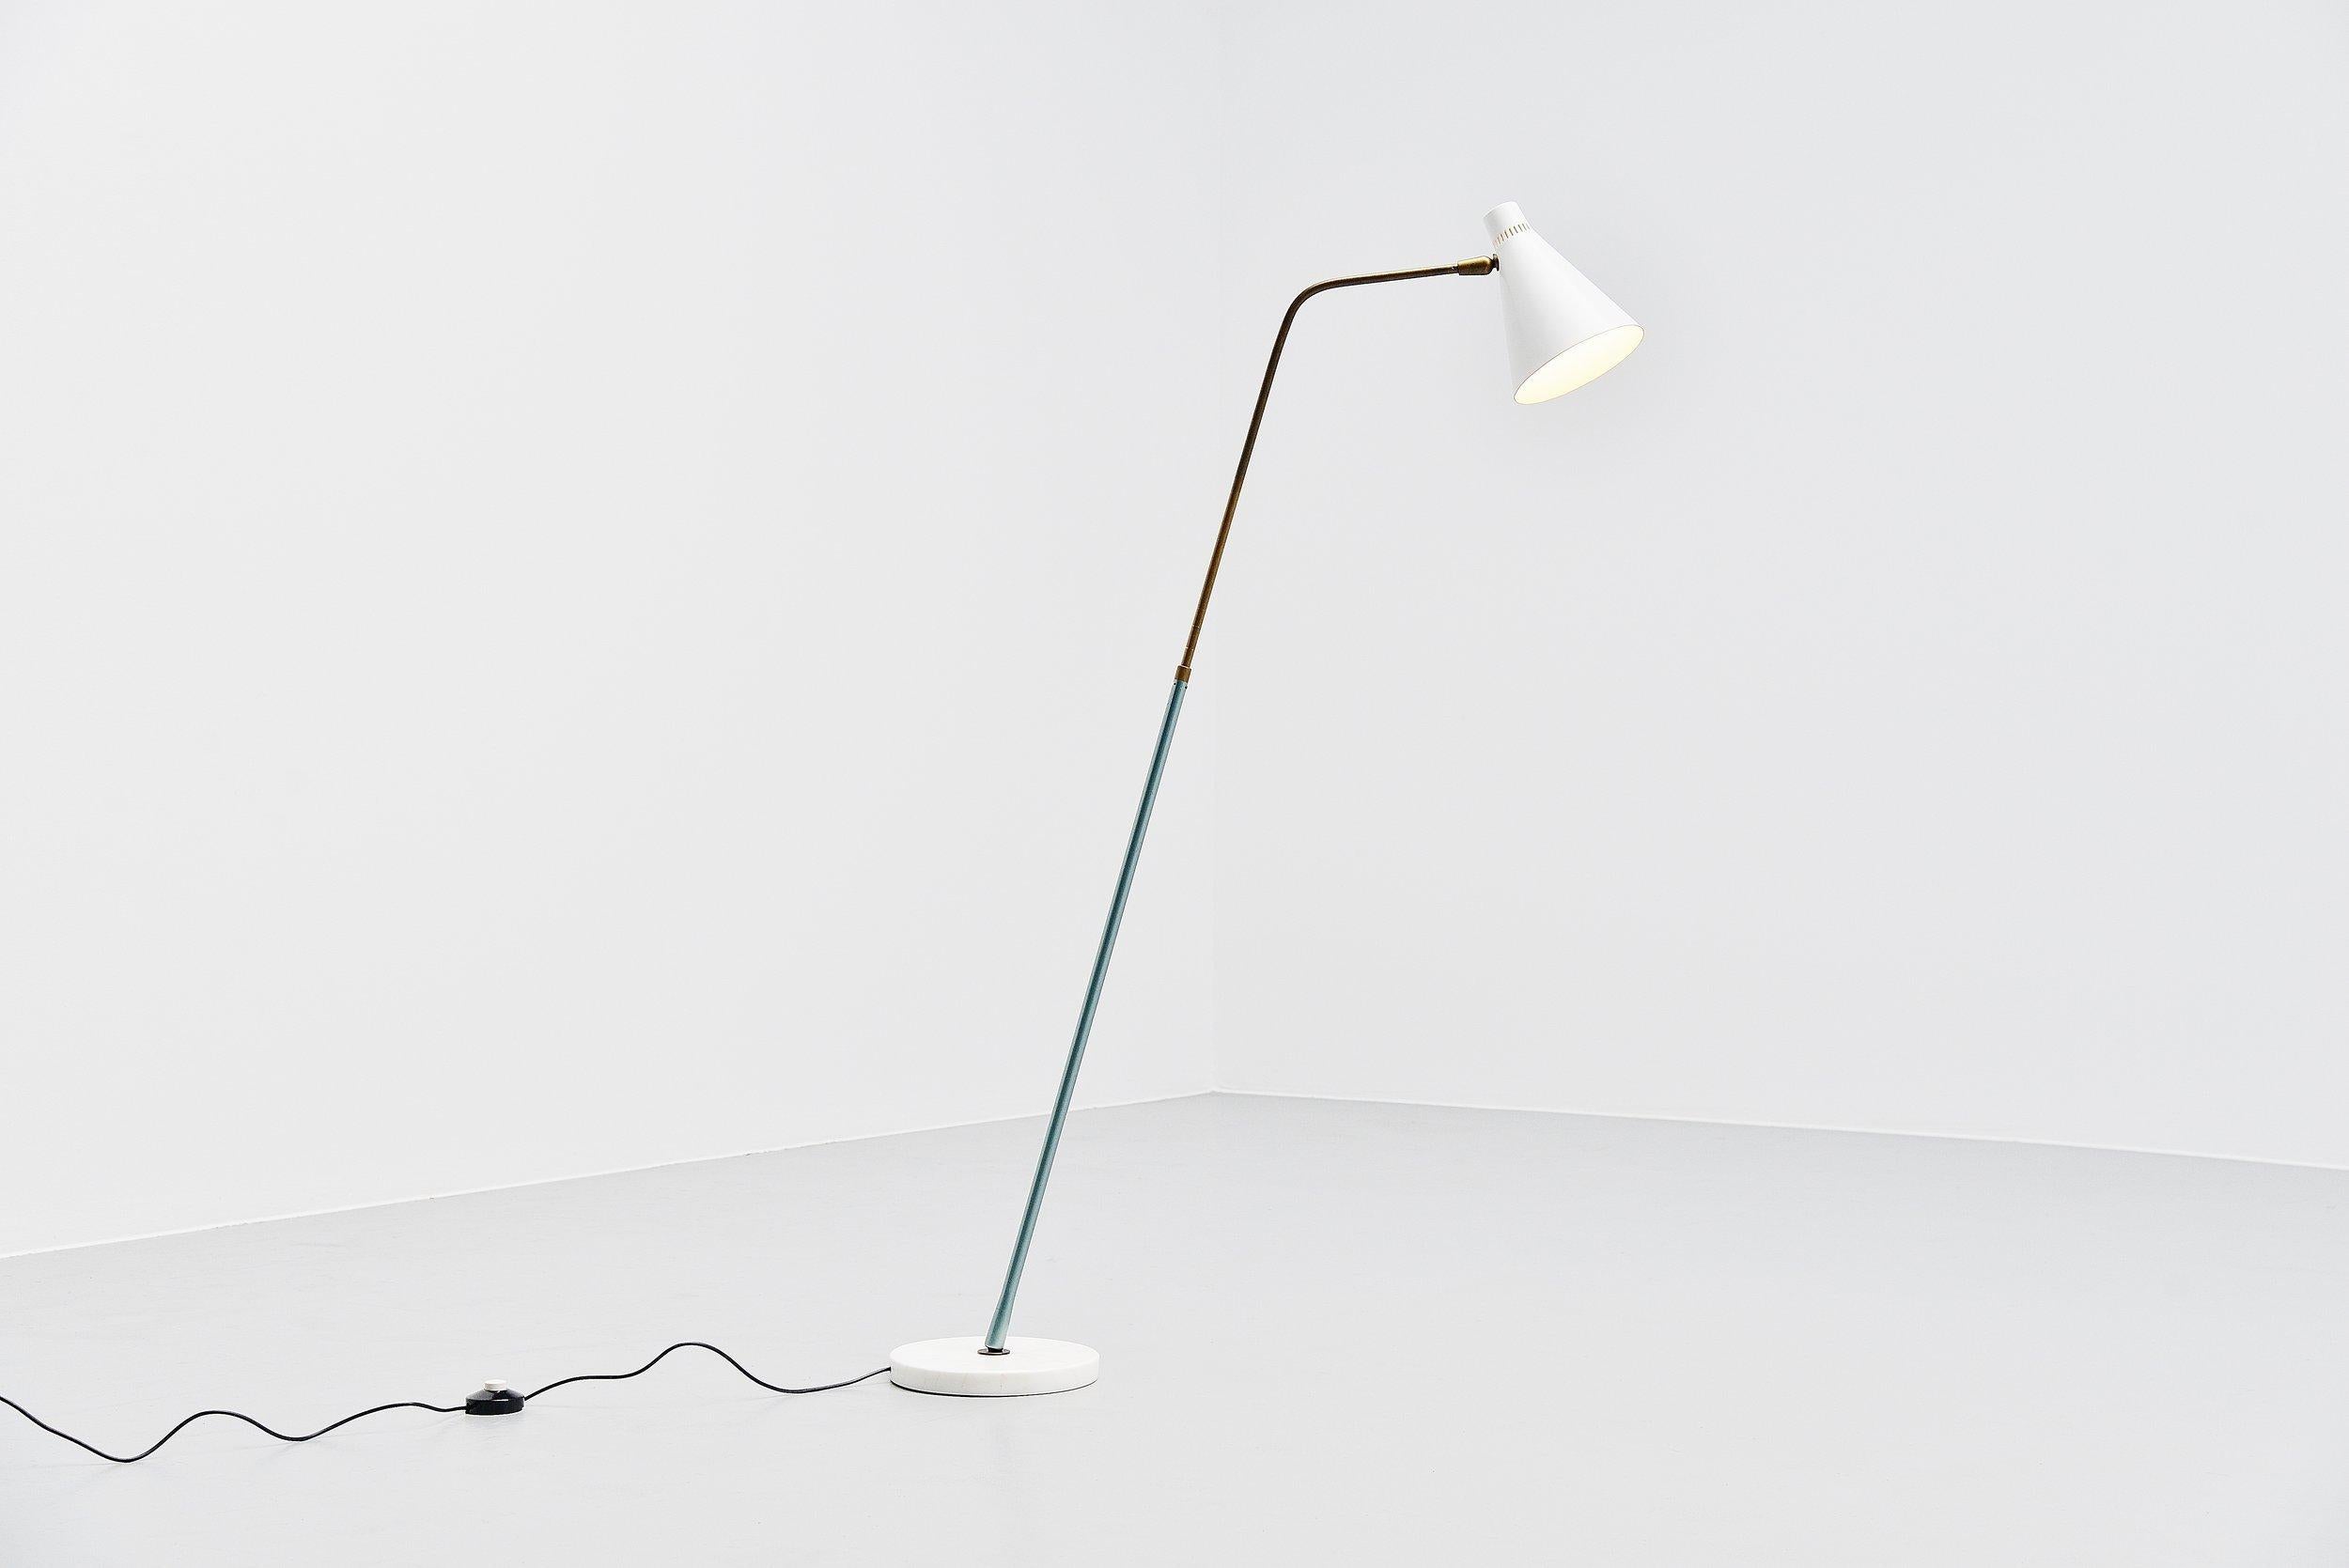 Very nice and sophisticated minimalist extendable floor lamp designed by Giuseppe Ostuni and manufactured by Oluce, Italy 1952. This lamp has a stem that is adjustable in angle and height and the shade is adjustable as well. Very nice solid brass